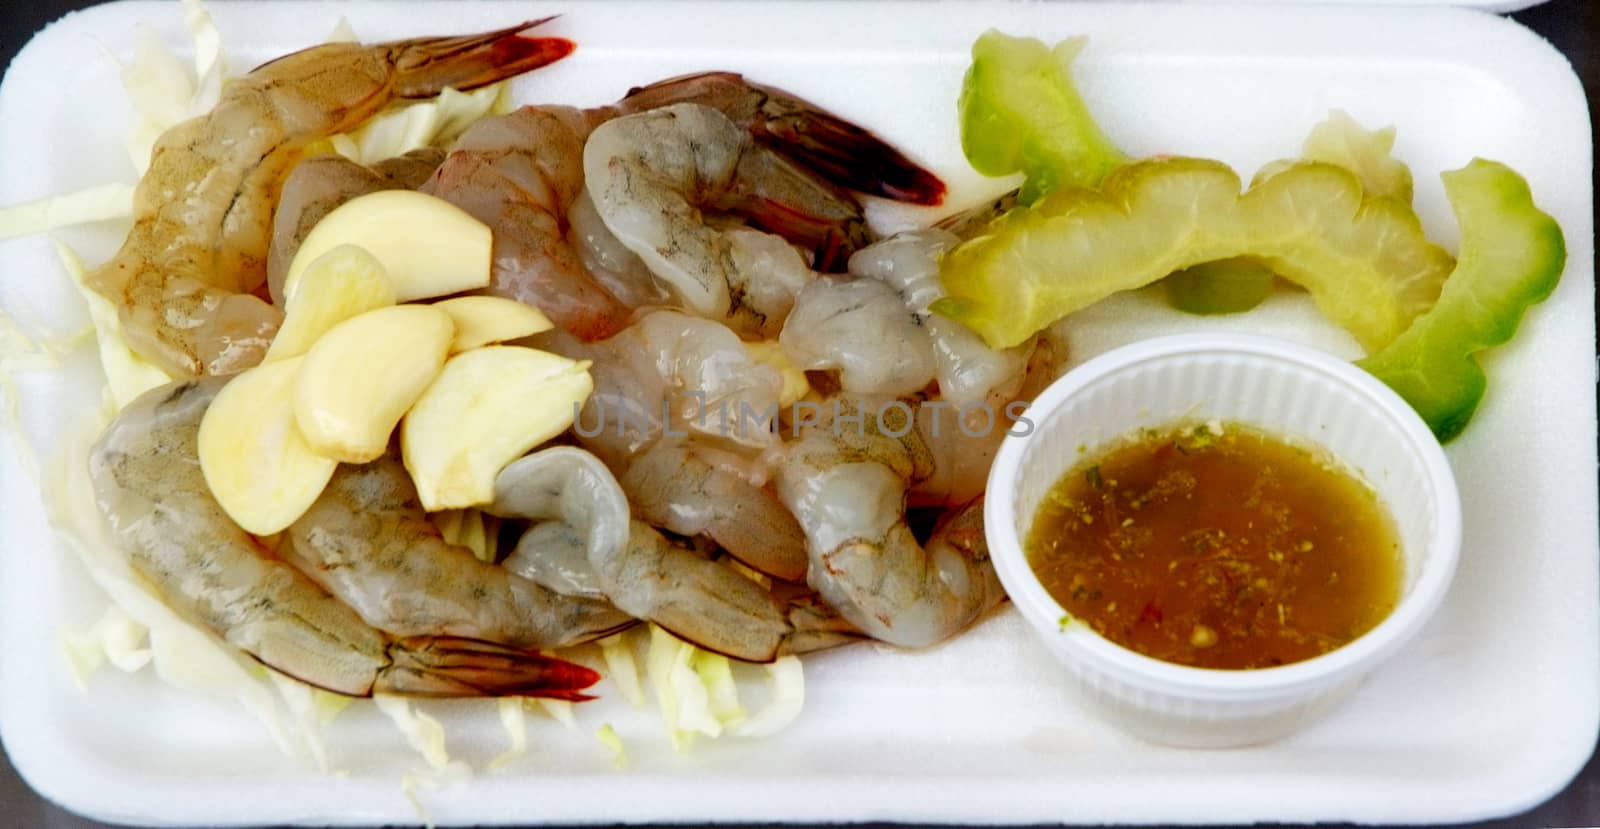 Shrimp in fish sauce by ideation90